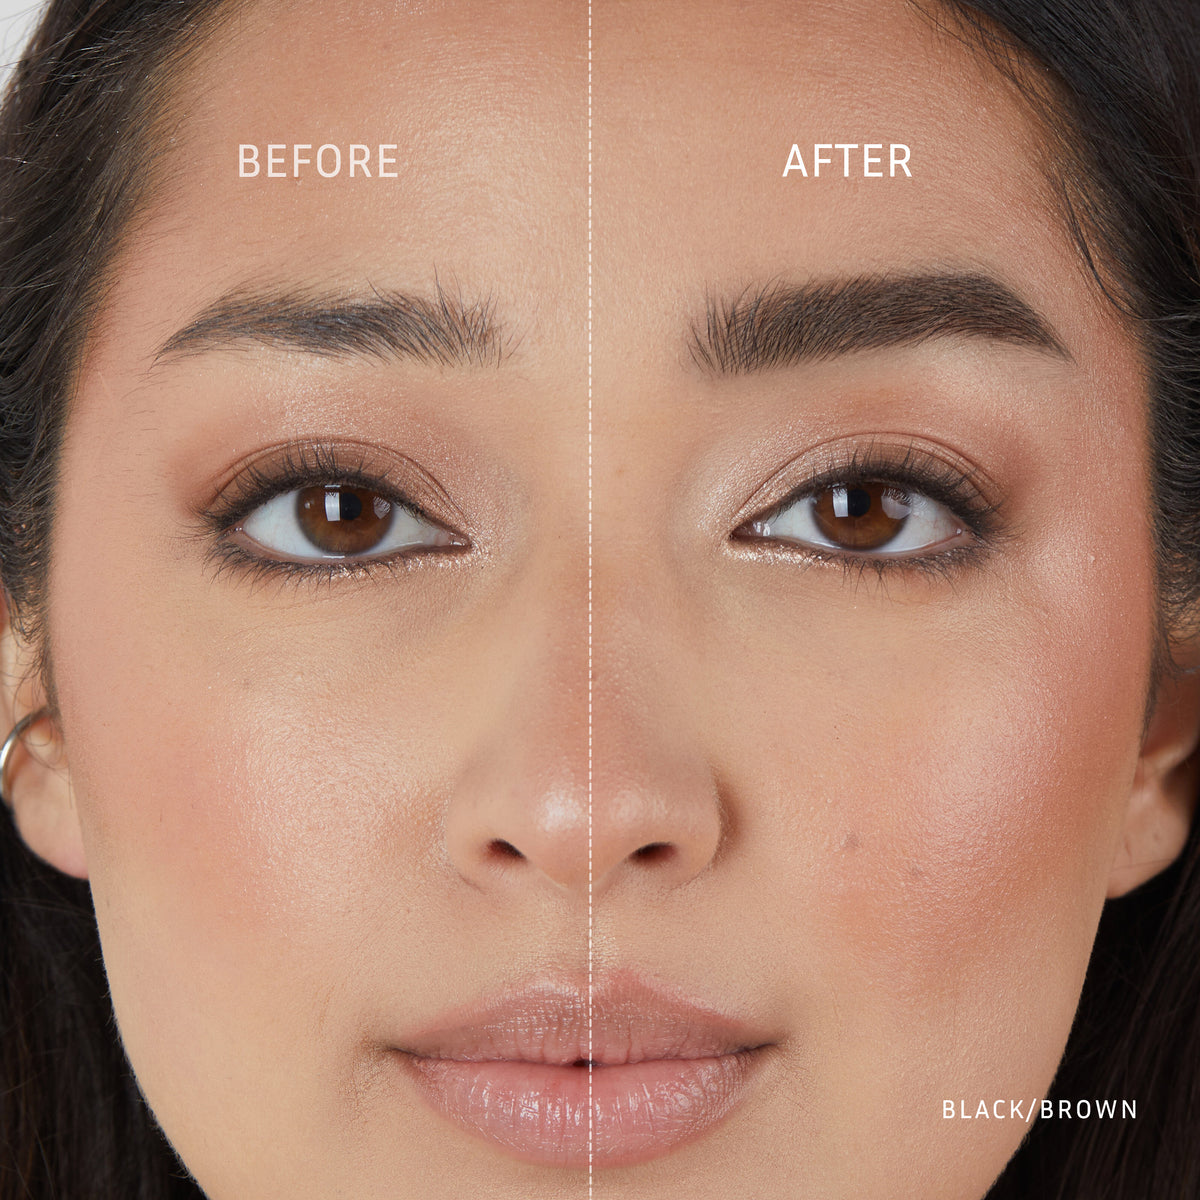 Lithe Lashes Beauty Accessories Brow Precision Pencil A before and After photo showing a model's face with a white divider down the middle of her face, where on the left side of the image shows no brow pencil on her right eyebrow, and on the right side of the image shows the model's left eyebrow after using the black/brown pencil on her brows showing a fuller and more complete look to her face